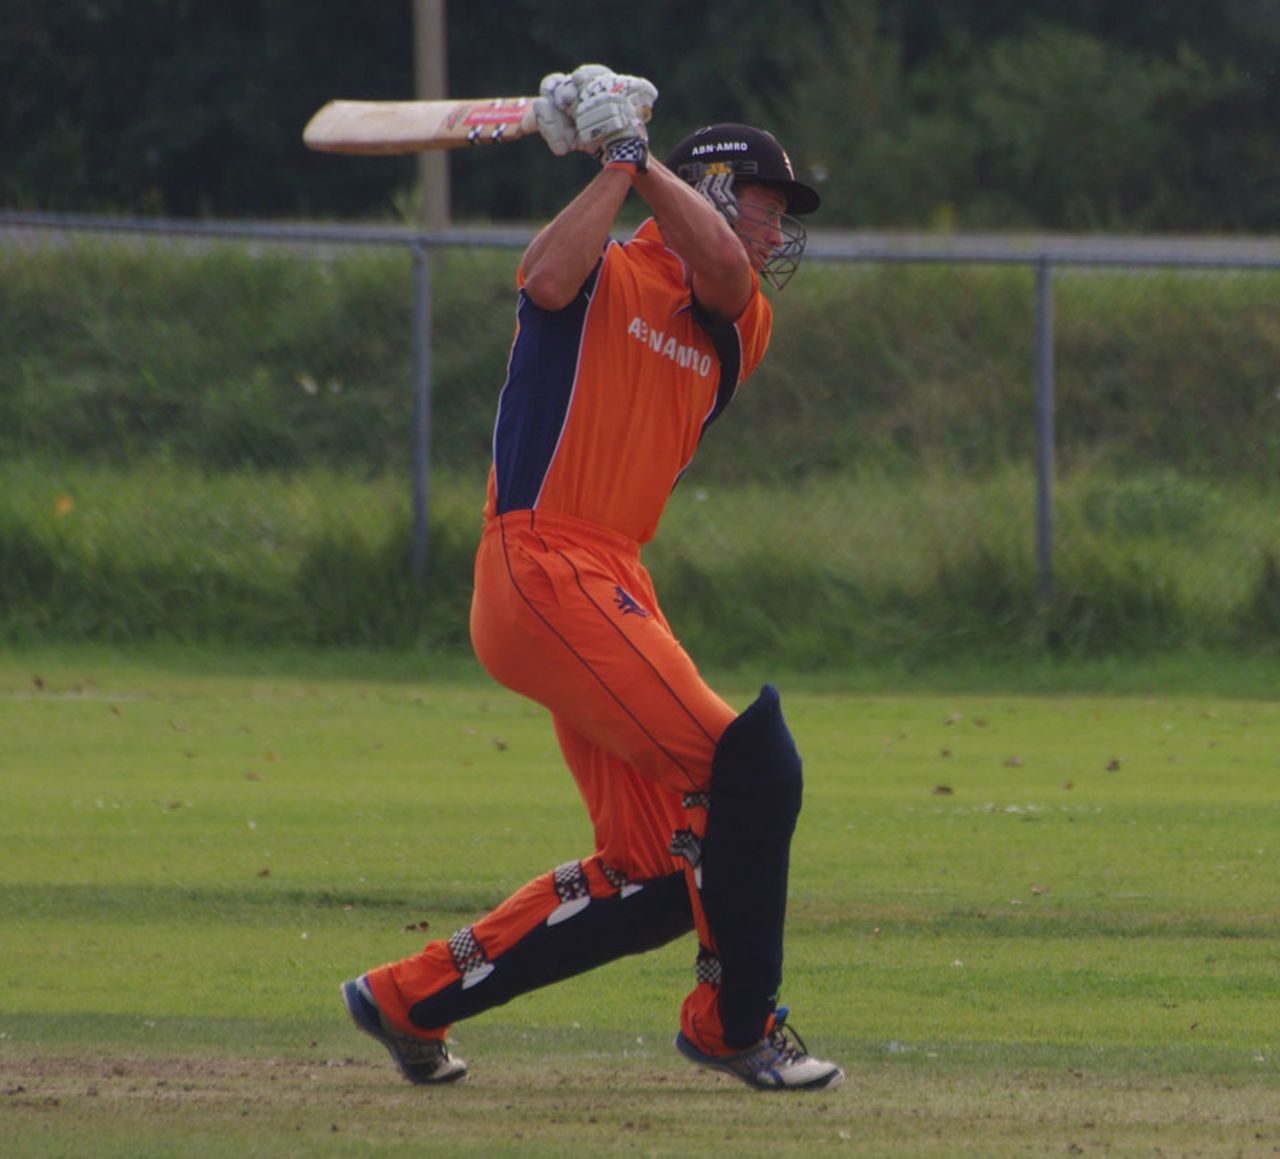 Netherlands' Ben Cooper hits down the track, Canada v Netherlands, ICC World Cricket League Championship, King City, August 27, 2013